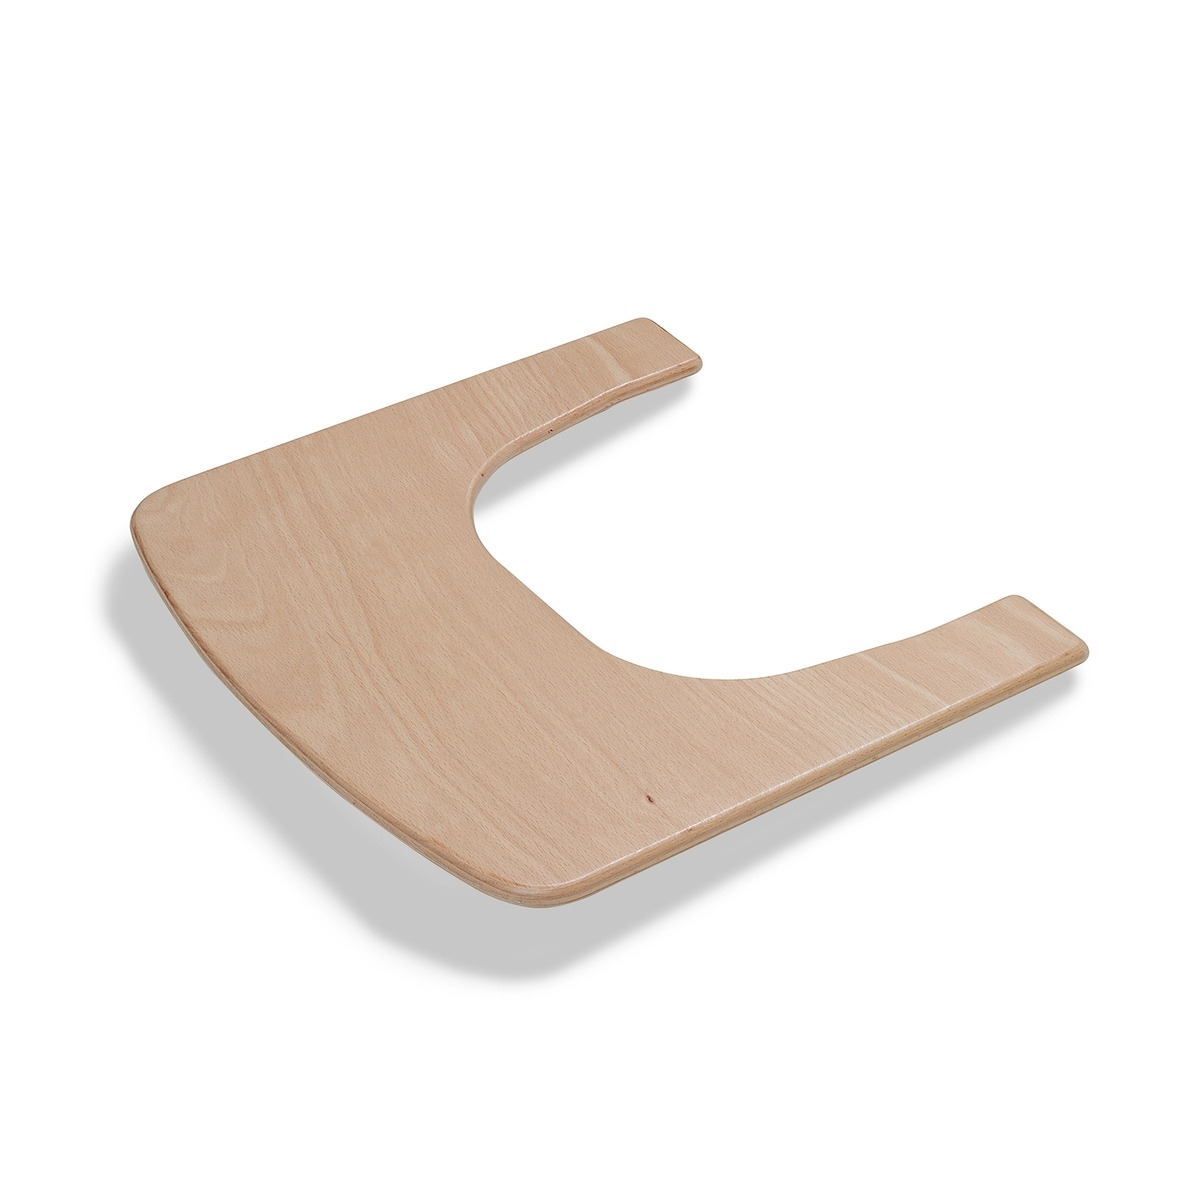 Syt Meal Shelf for Scalable High Chair - image 1